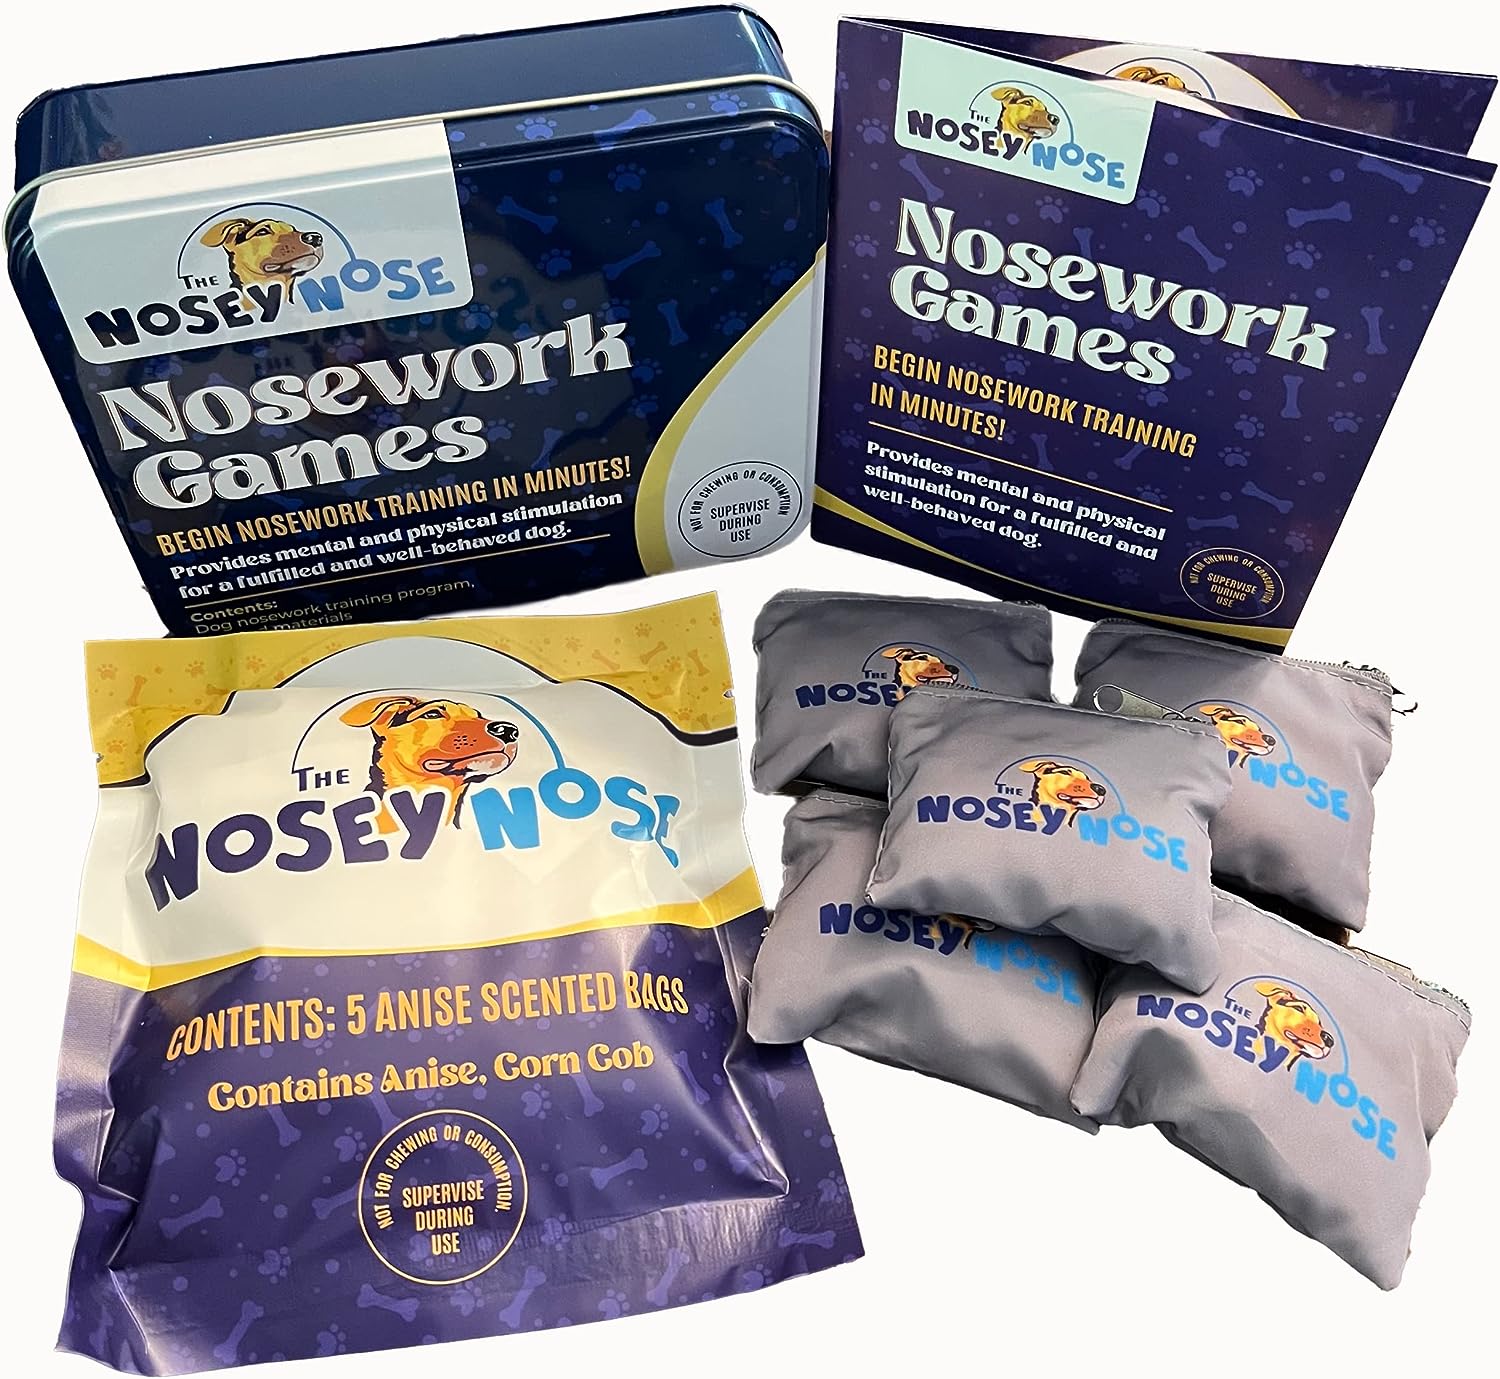 The Nosey Nose: Nosework Scentwork Training for Dogs